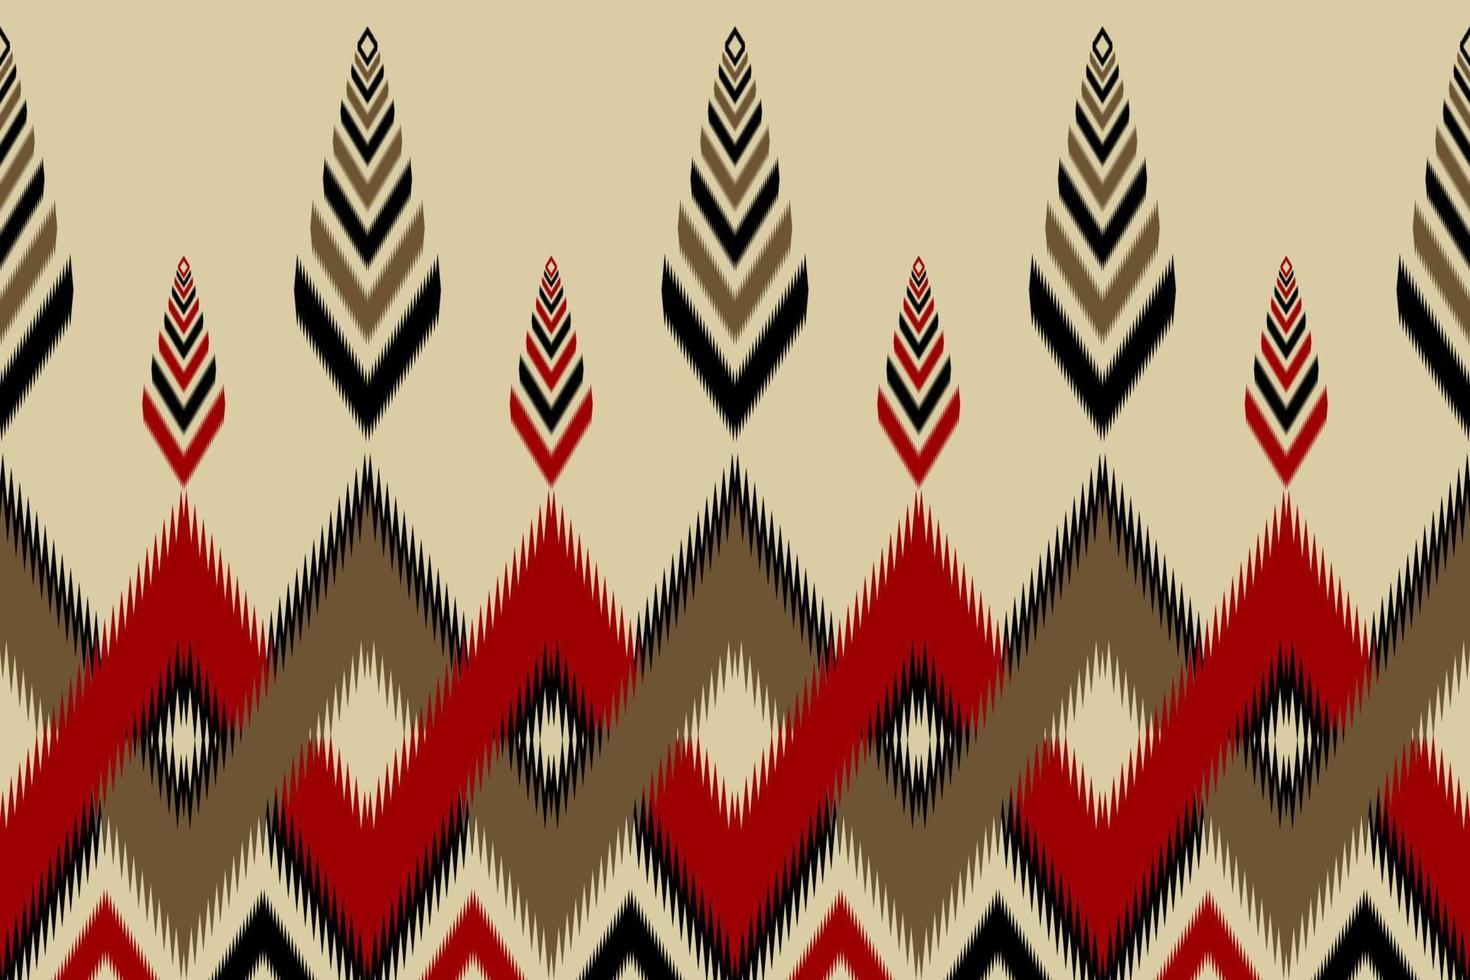 Ikat native style. Ethnic pattern traditional. Design for background,illustration,texture,fabric,batik,clothing,wrapping,wallpaper,carpet,embroidery vector